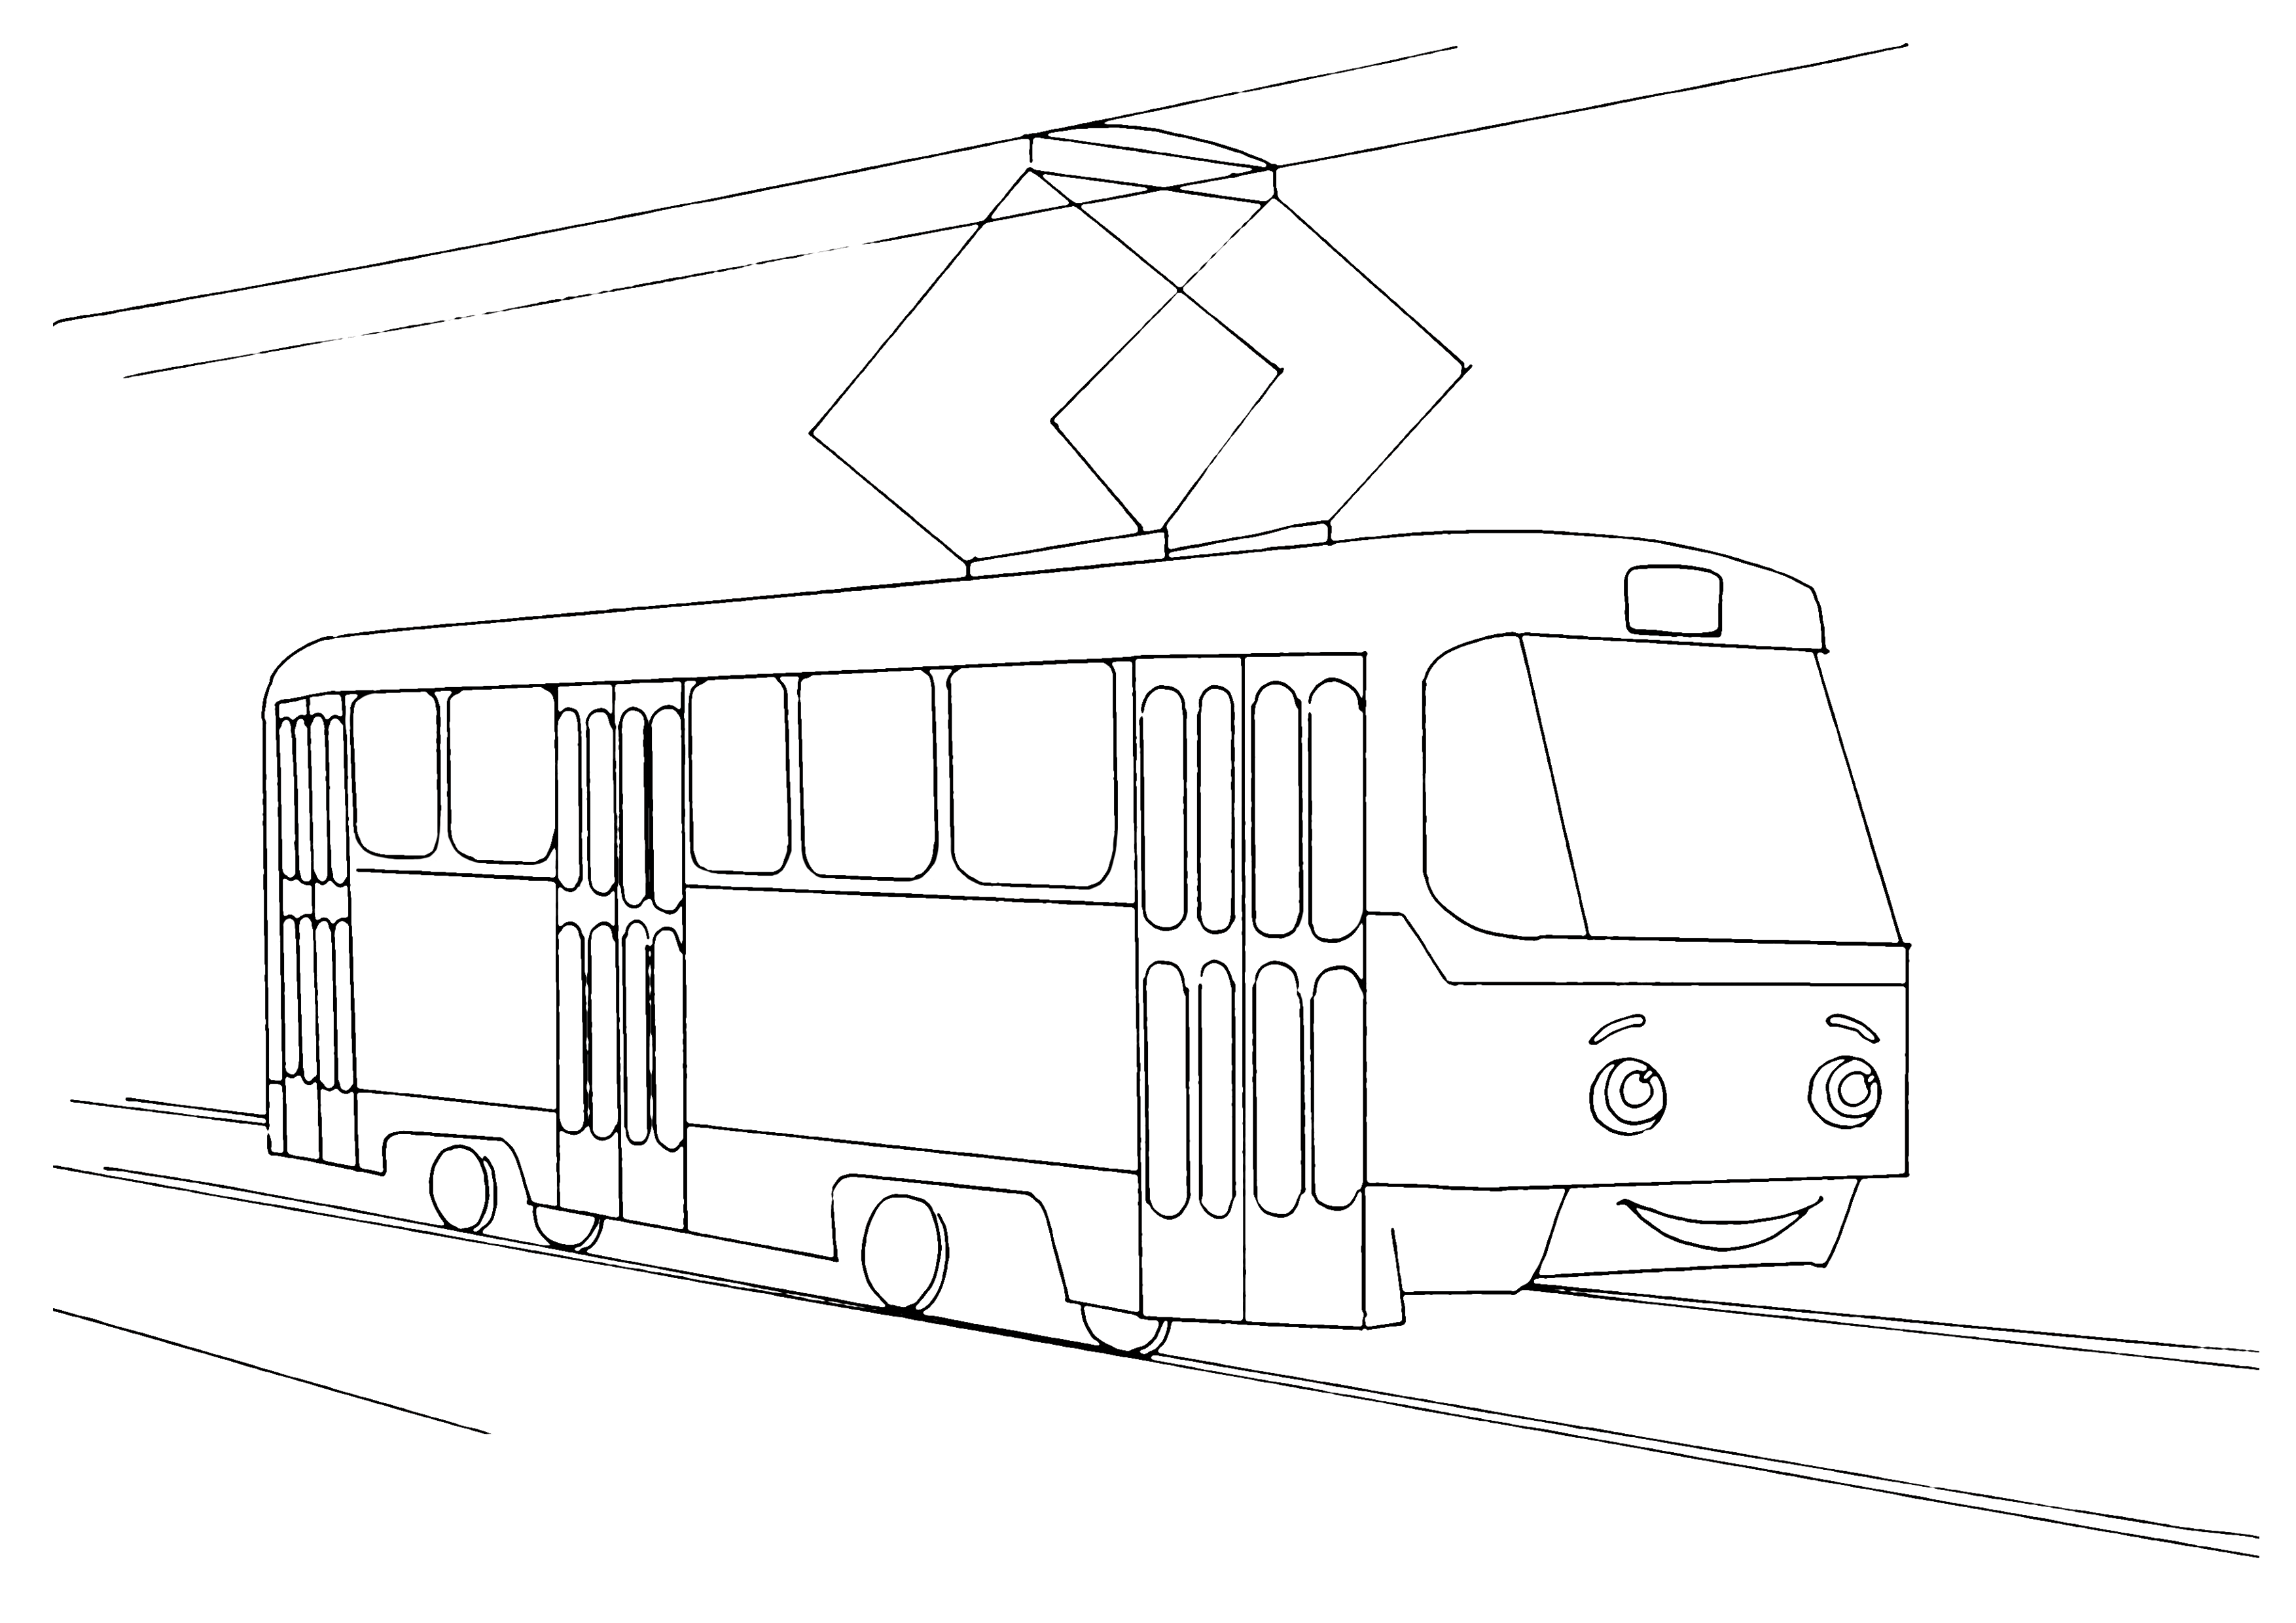 Tram Coloring Pages To Download And Print For Free